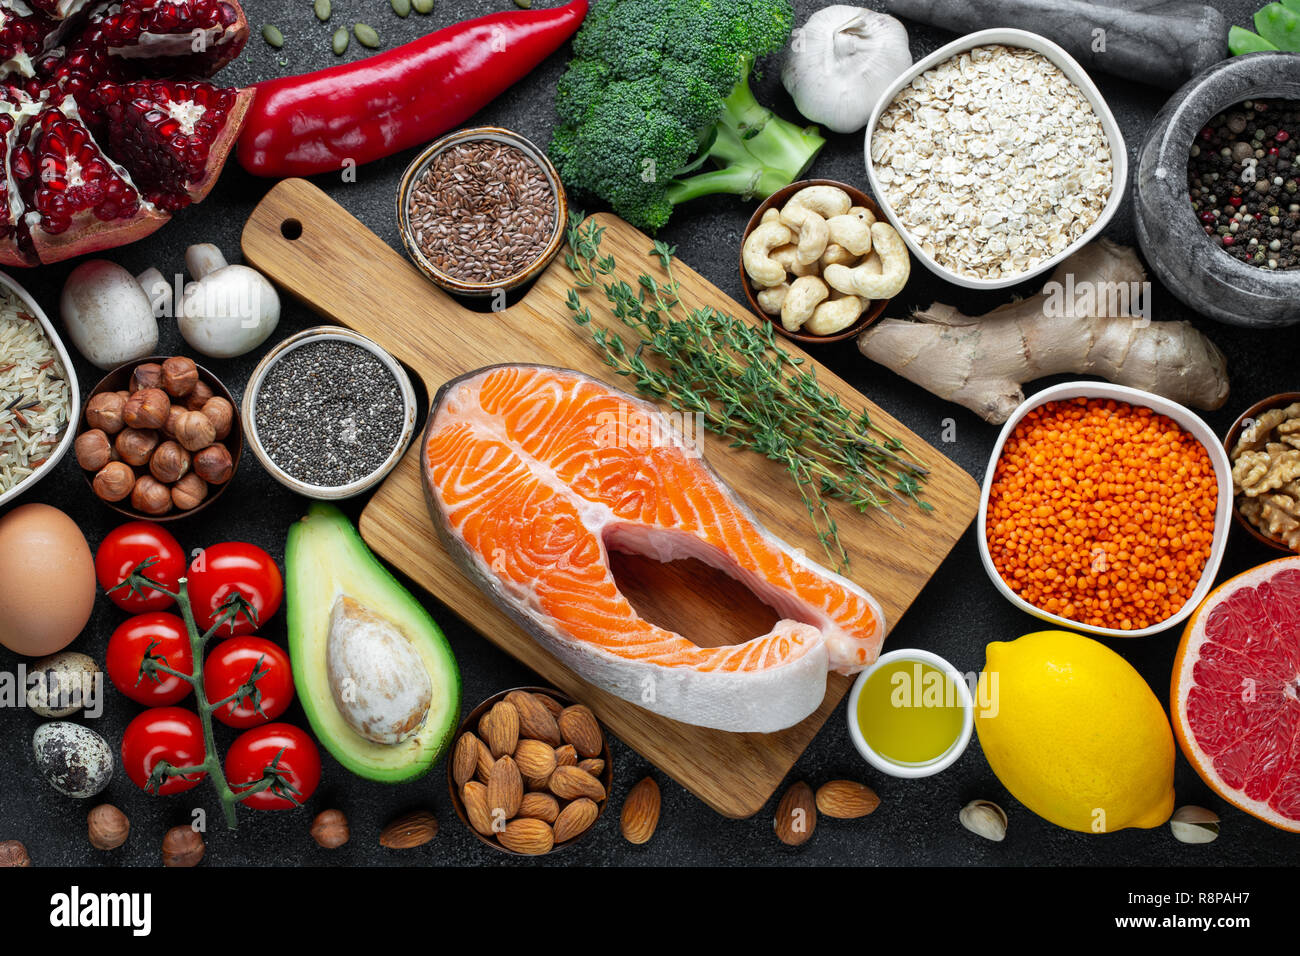 Healthy food clean eating selection: fish, fruit, nuts, vegetable, seeds, superfood, cereals, leaf vegetable on black concrete background. Flat lay Stock Photo